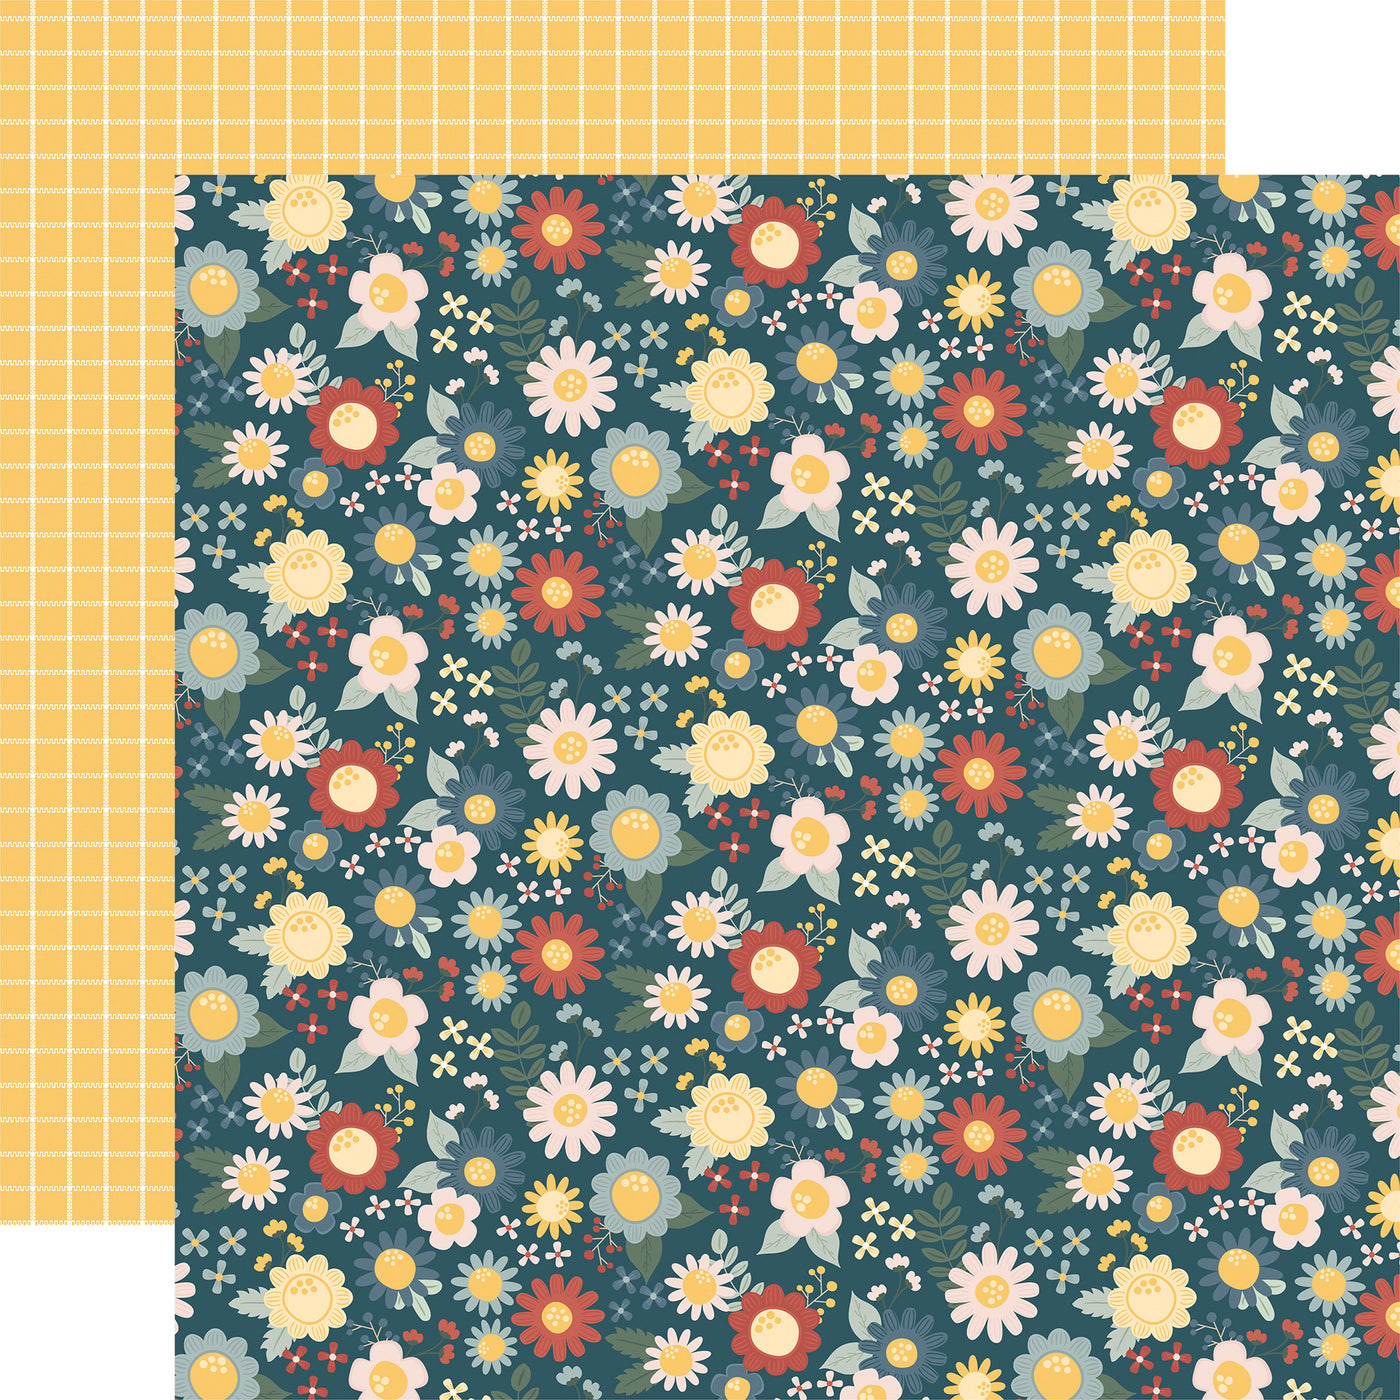 12x12 double-sided patterned paper. (Side A - blue, yellow, green, and pink floral on a navy blue background; Side B - white plaid on a yellow background)